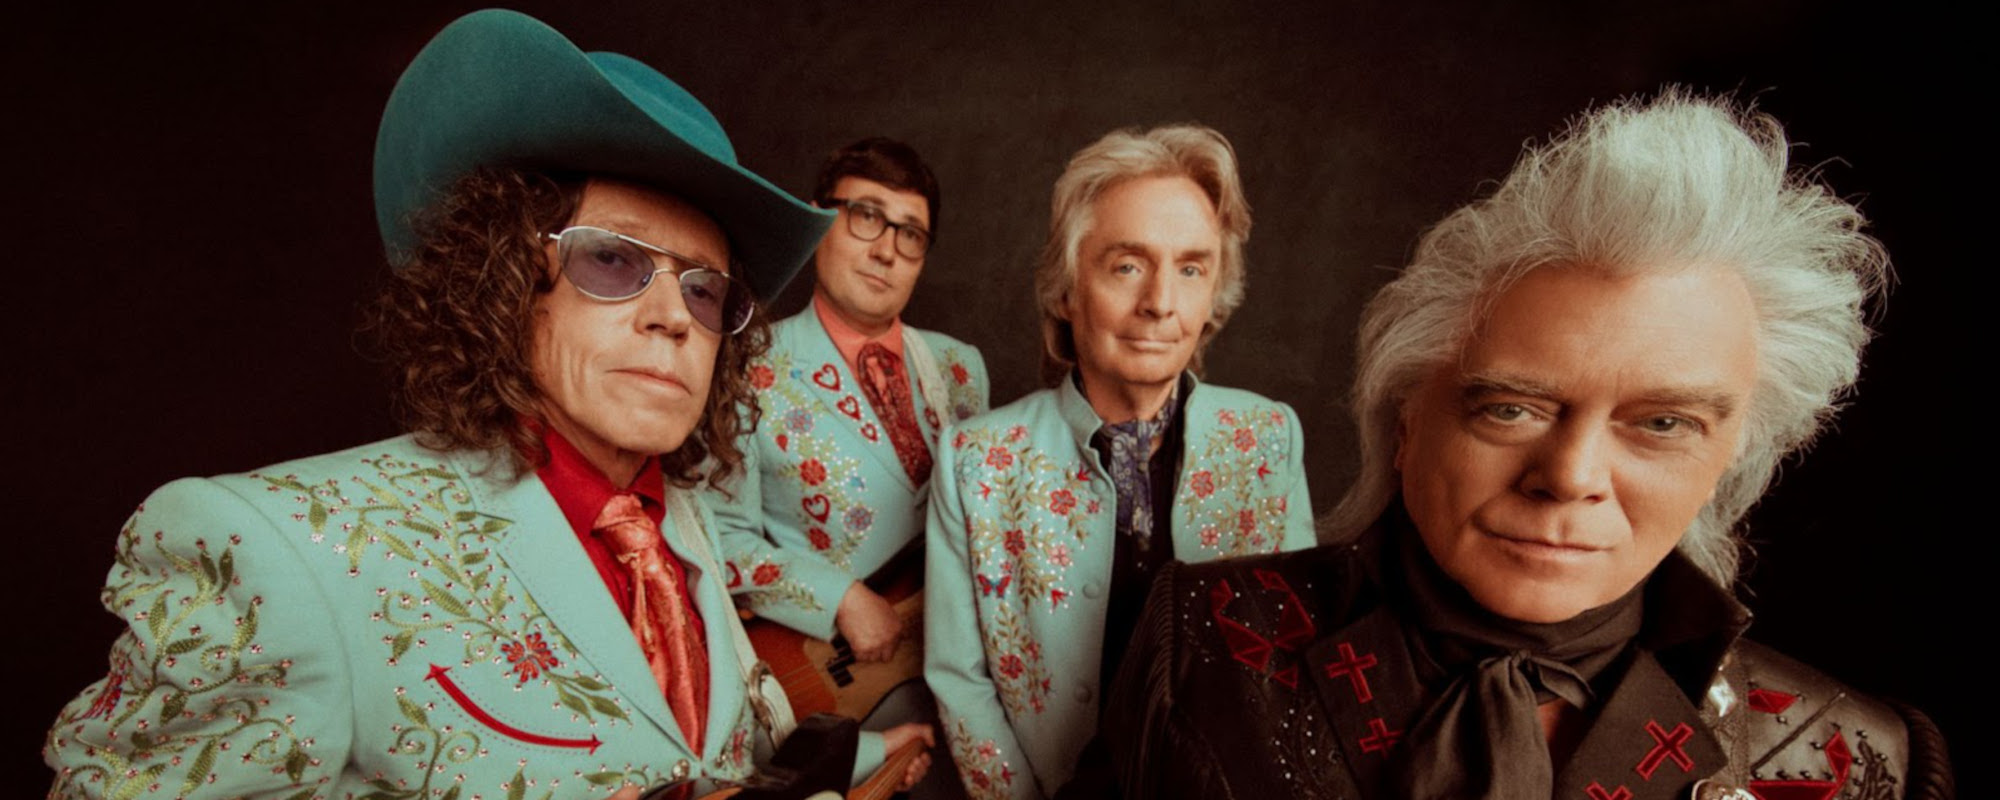 Marty Stuart Continues Flying High with “Altitude”